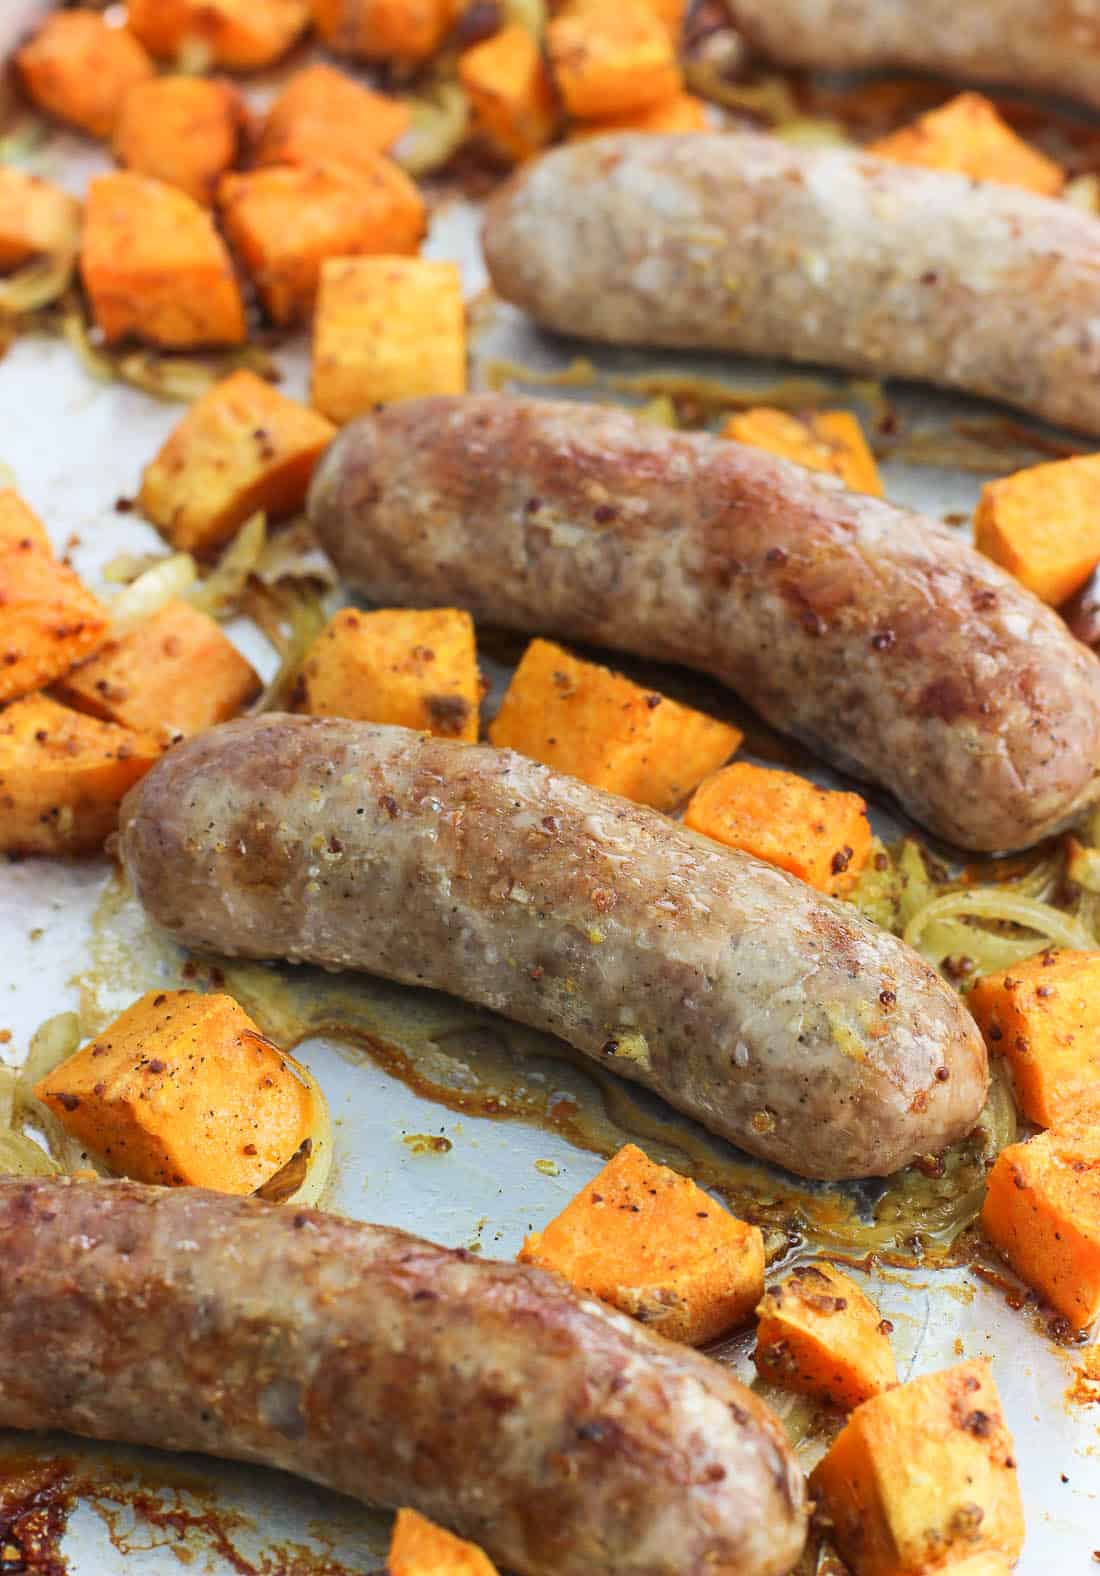 Roasted bratwurst and sweet potatoes on a metal baking sheet after being cooked